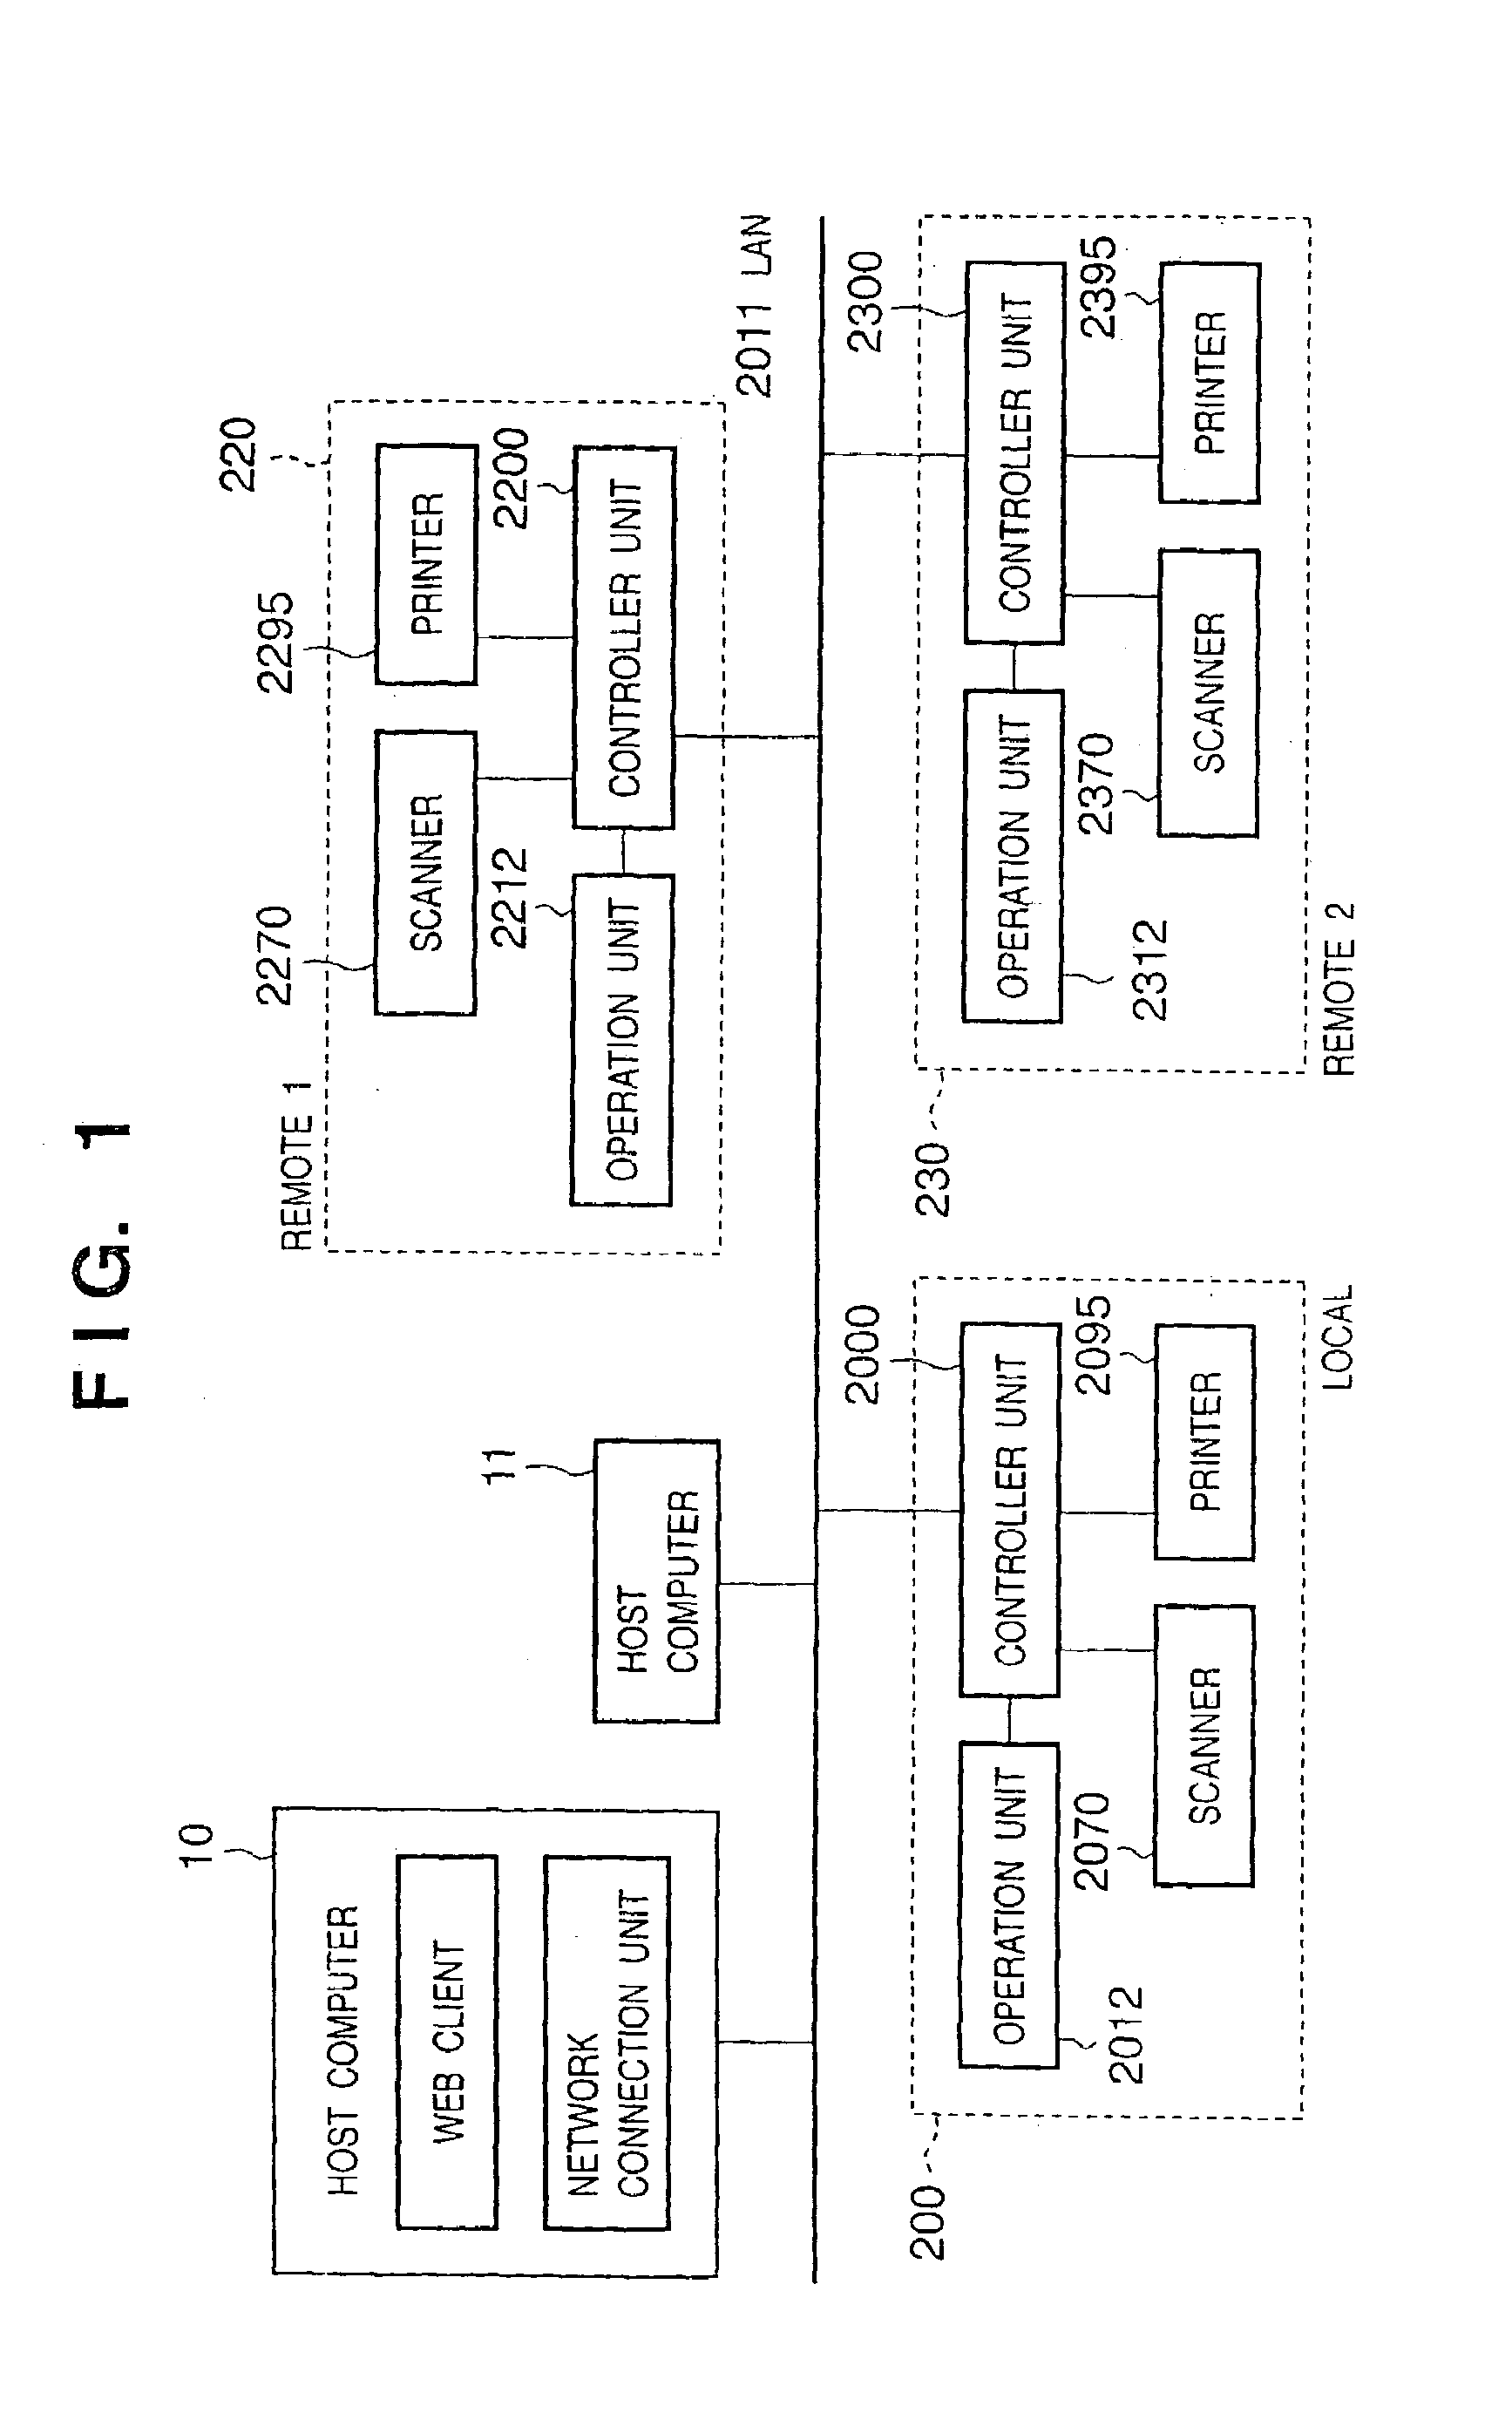 Control method for image processing apparatus connectable to computer network